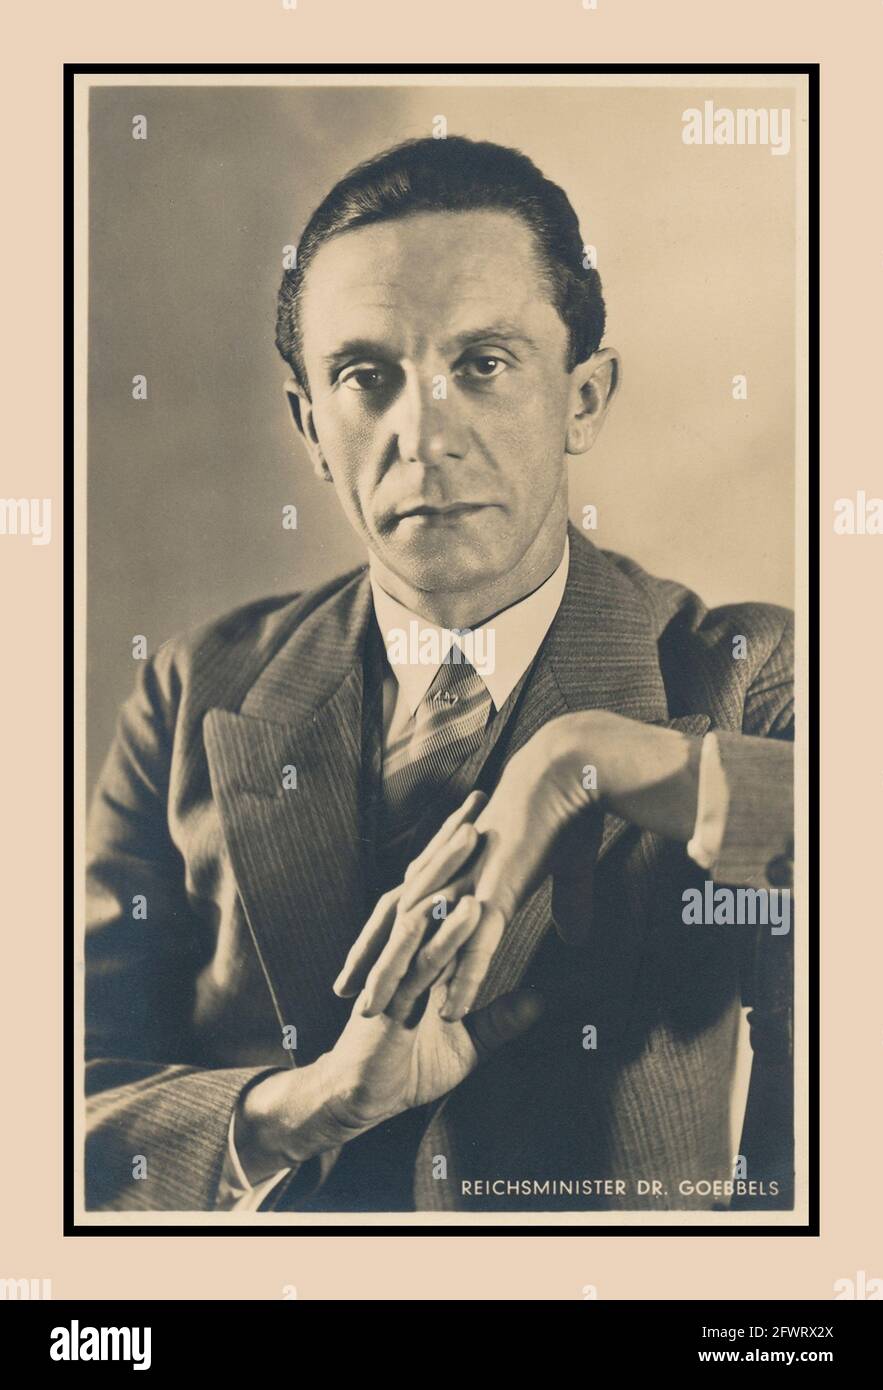 GOEBBELS 1930s Portrait of Paul Joseph Goebbels a German Nazi politician and Reich Minister of Propaganda of Nazi Germany from 1933 to 1945. He was one of Adolf Hitler's closest and most devoted associates, and was known for his skills in public speaking and his deeply virulent antisemitism, which was evident in his publicly voiced views. Committed suicide with his family in 1945 with Allies on final assault to central Berlin Germany Stock Photo